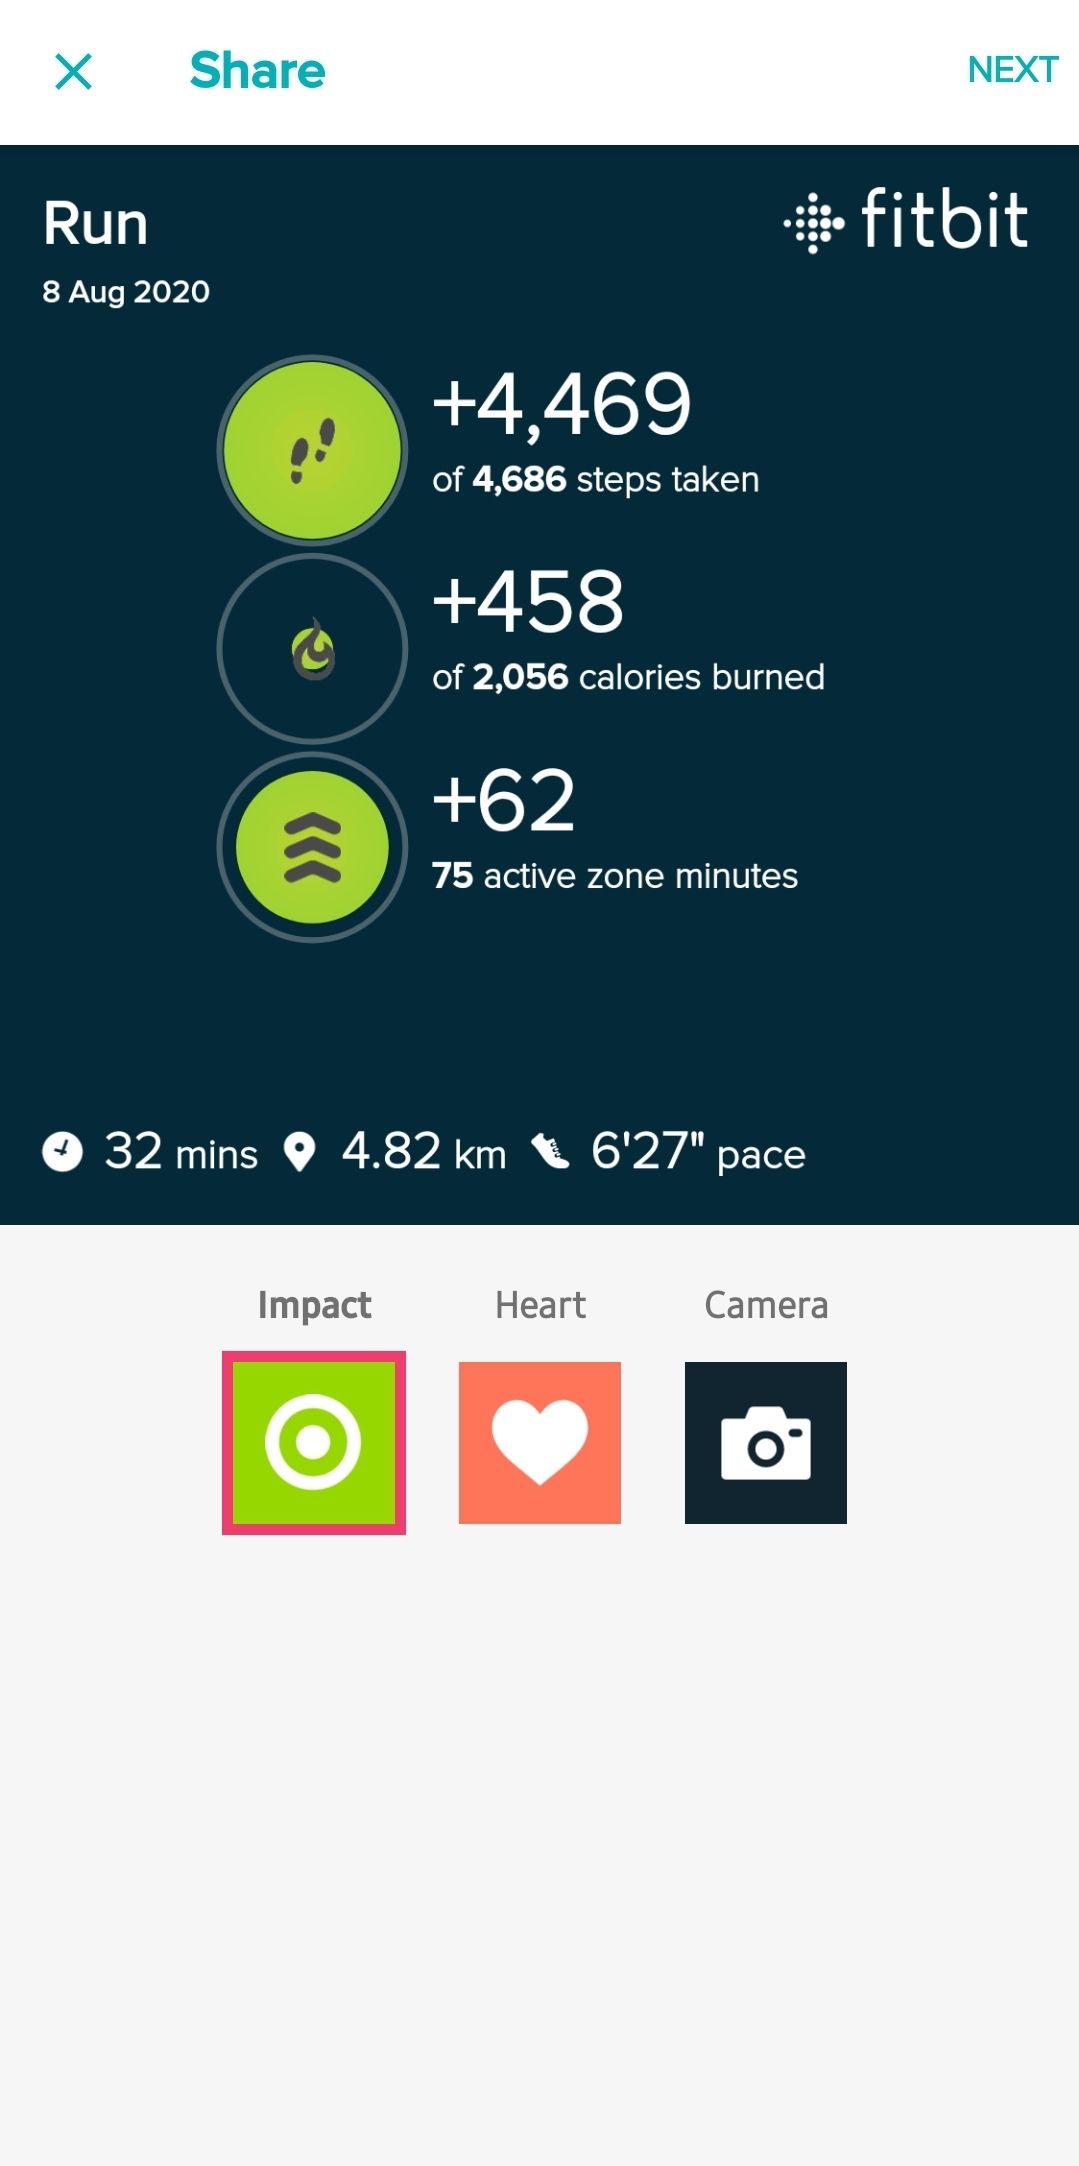 fitbit distance tracking